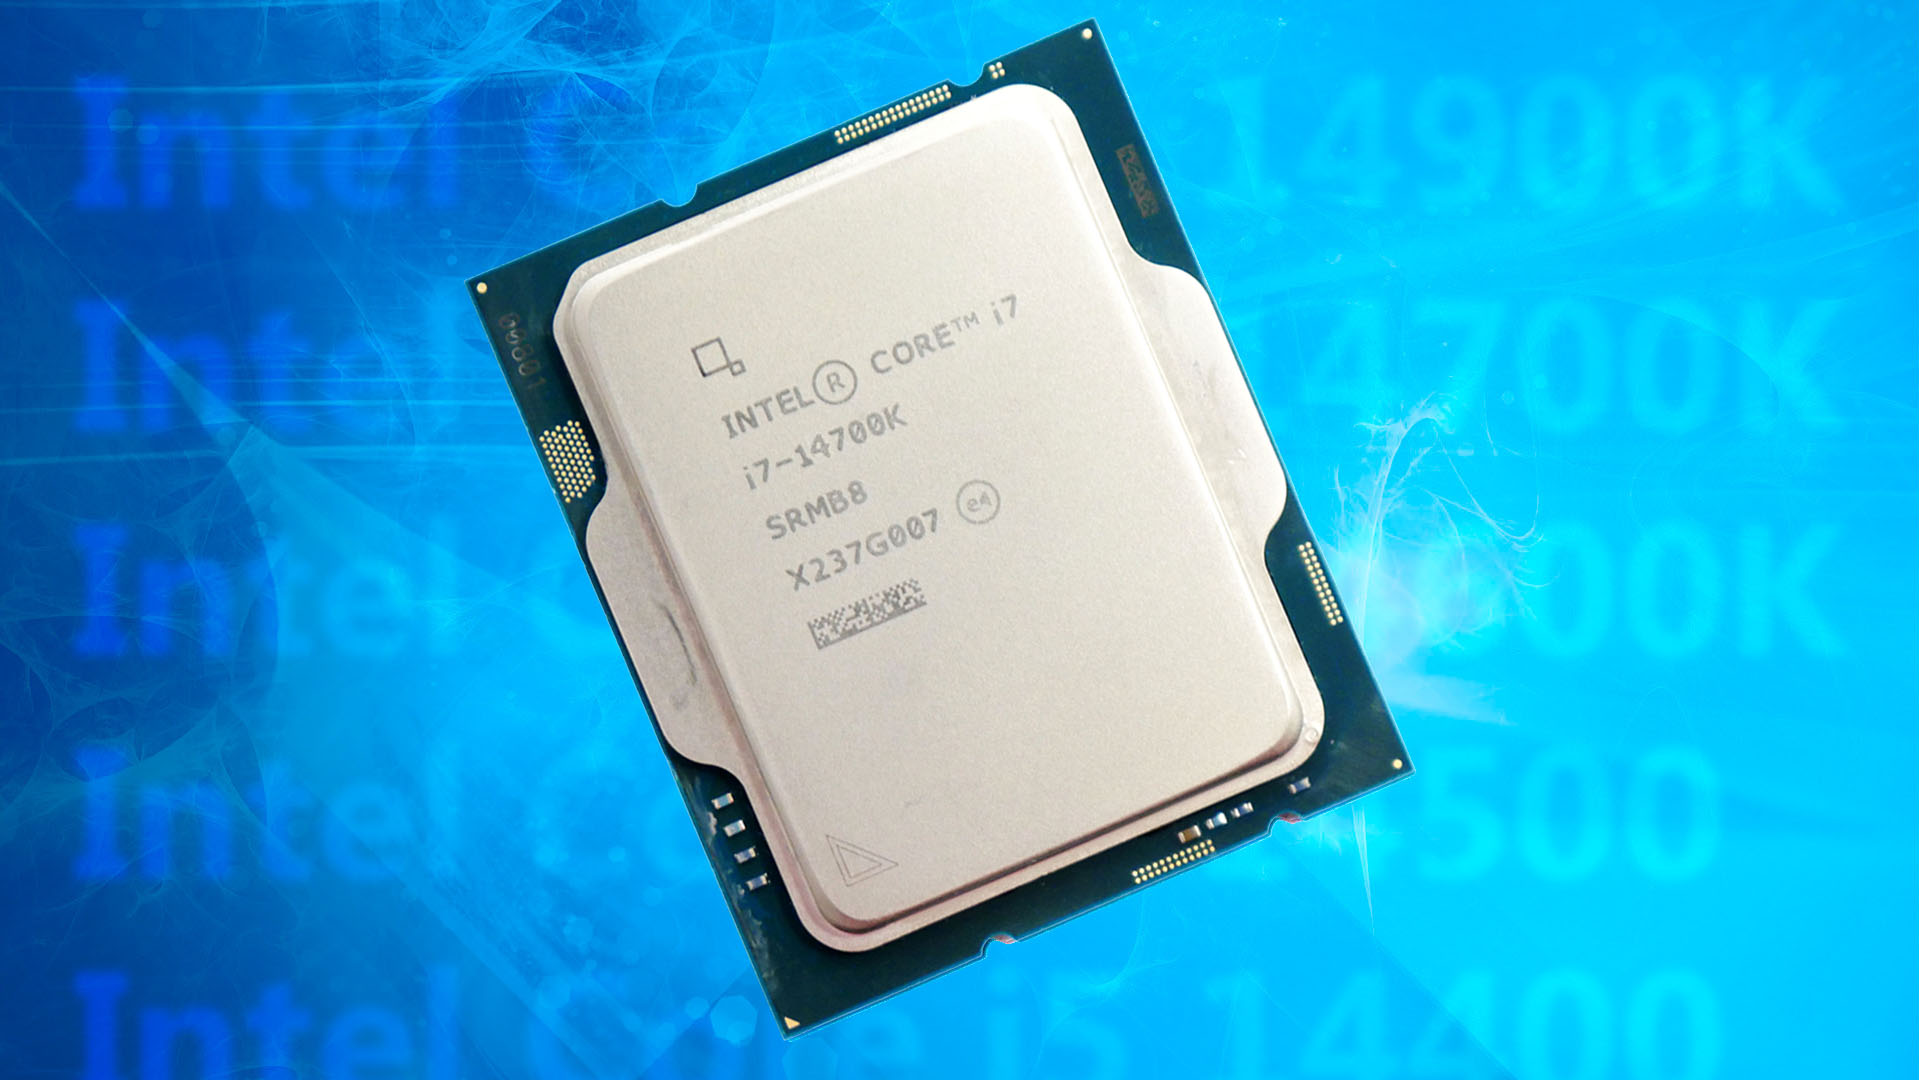 Possible 14th-gen Intel CPU lineup revealed